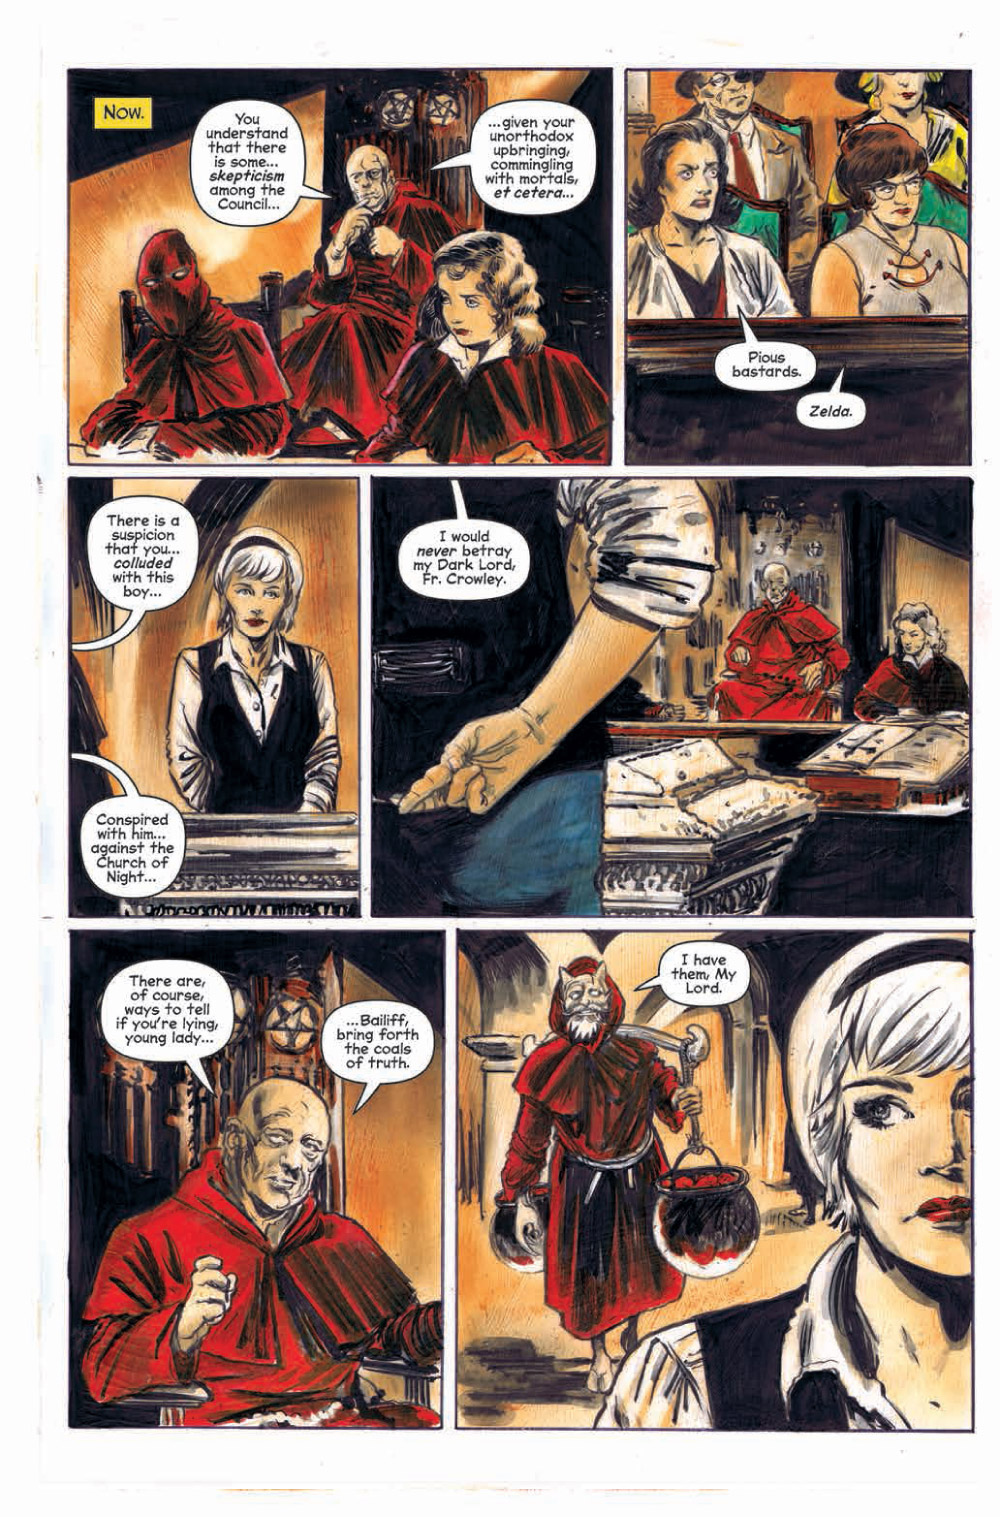 Chilling Adventures of Sabrina #5 First Look